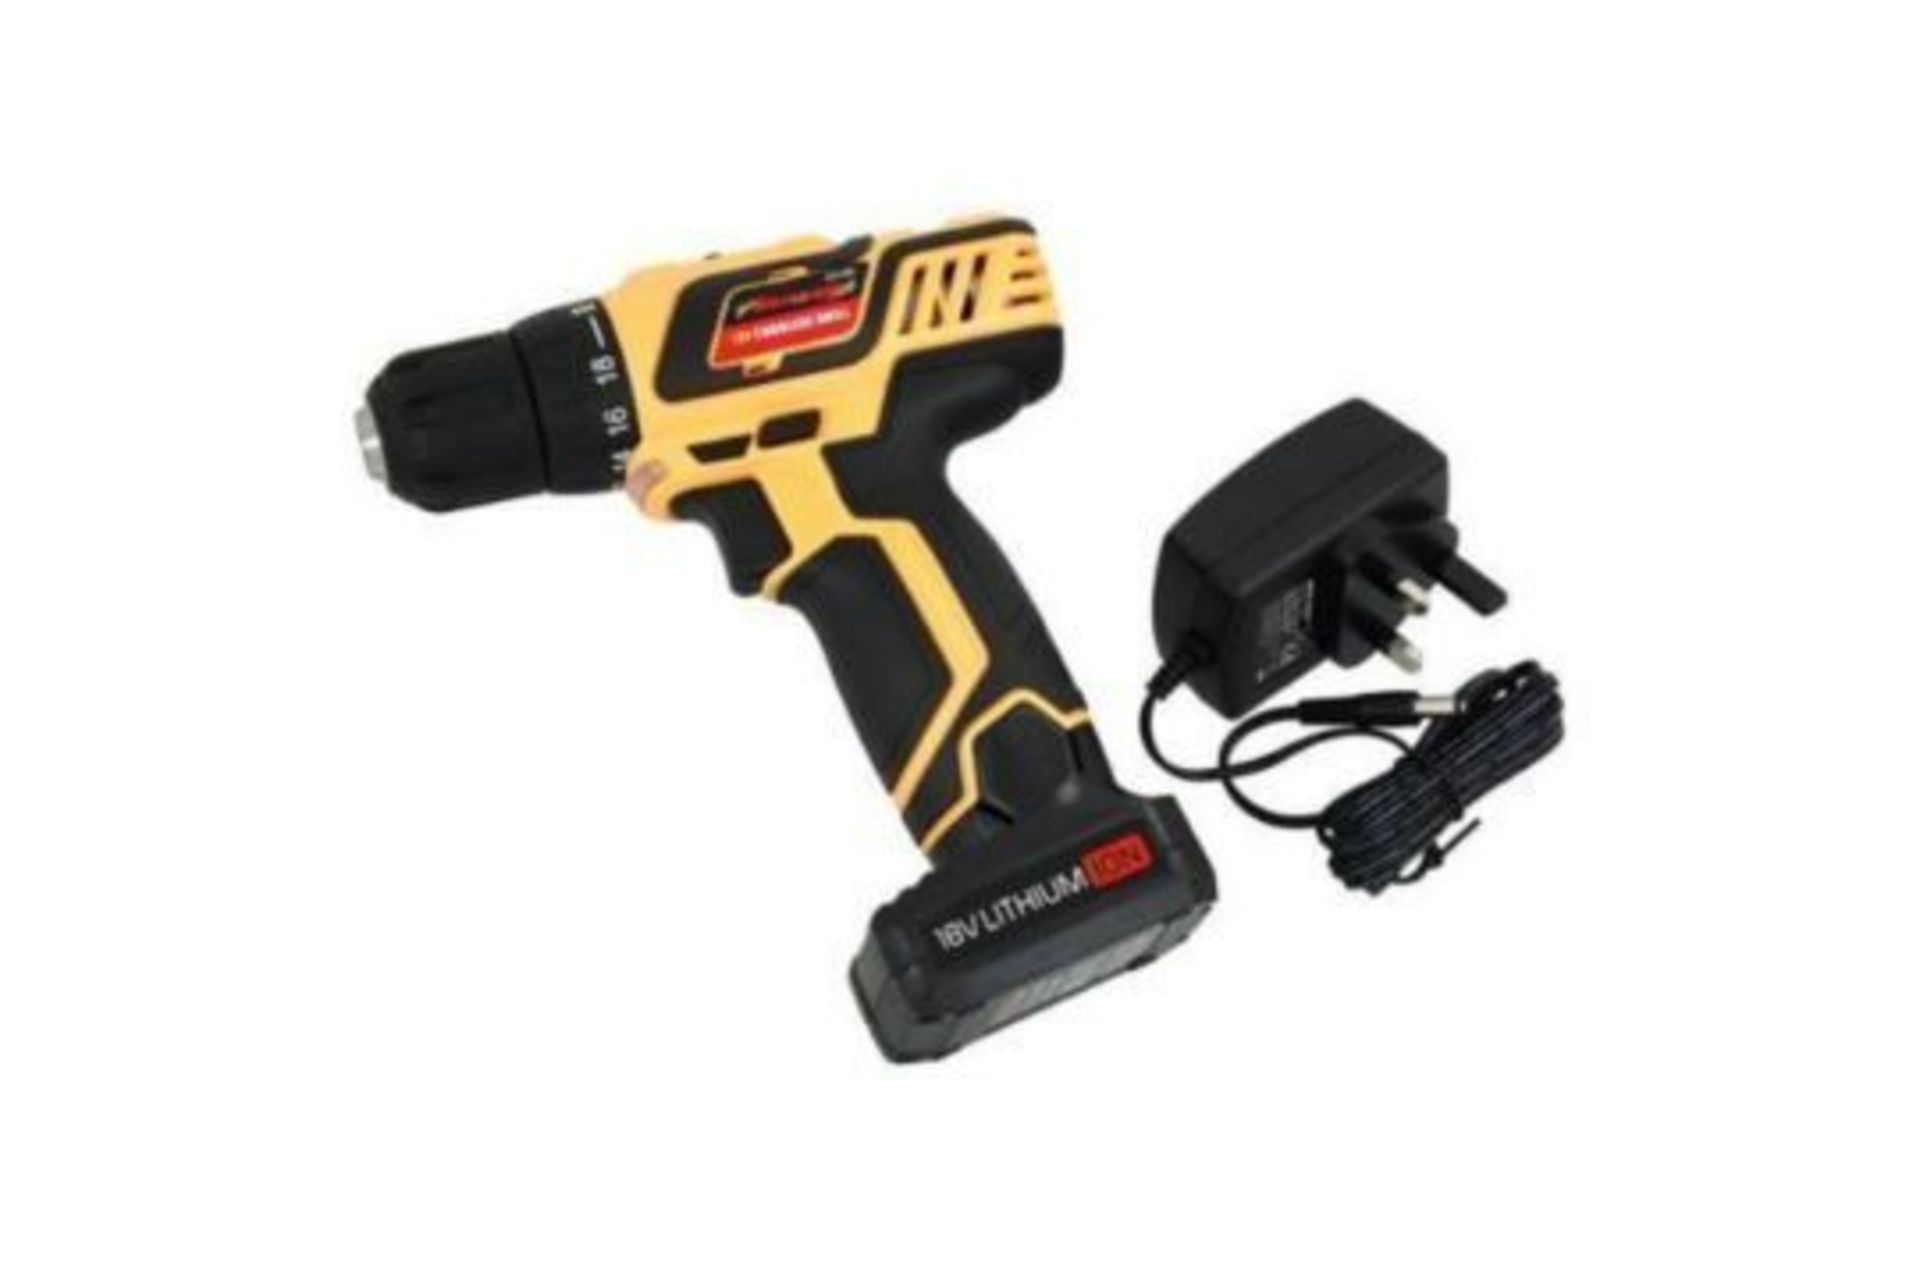 BRAND NEW NEILSEN 18V CORDLESS DRILL AND CHARGER